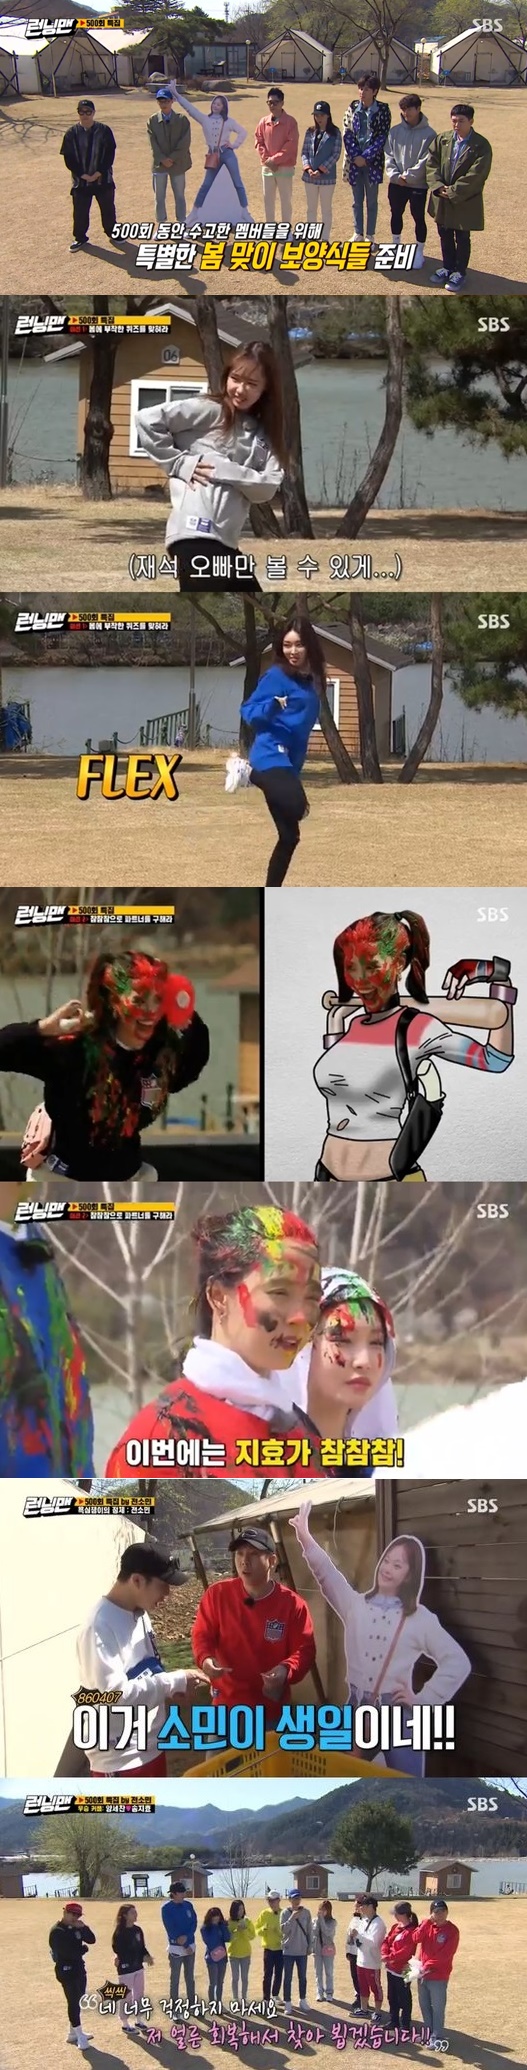 SBS Running Man, which was held 500 times, took first place in entertainment TV viewer ratings in the same time zone.According to Nielsen Korea, a TV viewer rating research institute, Running Man, which was broadcast on the 26th, recorded 5.5% of the average TV viewer ratings and 7.9% of the second part (based on the Seoul Capital Area furniture TV viewer ratings), beating all the same time entertainment such as Dog ear for boss and together.The 2049 target TV viewer ratings, which are important indicators of major advertising officials, rose to 3.8% (based on Seoul Capital Area household TV viewer ratings, Part 2), and the highest TV viewer ratings per minute was 9.7%.The show was decorated with the 500th special Race Do You Eat Rice Race, and Apink lanterns, Bomi, Cheongha, Lovelyz Americas, and Wikimikki Yujeong joined as guests.Running Man, which was prepared as a quiet self-congratulatory race in consideration of the recent social atmosphere, was unveiled at the 500th time by Apink and Cheonghas new song stage, and Running Man, which raised the atmosphere, drew a big smile from its first mission, Dancing Catalena, to extraordinary misrepresentations.In the second mission, Im Going to Save Now, the members poured 500 times of makeup gags, turning over paints according to the speed of the game.The Americas became a techno warrior through the Game of the True Game, and Lee Kwang-soo turned into a water-color monster by replaying colostrum.On the other hand, the members had to find out the Identity of the  greedy who wanted to monopolize all the products in Race, and eventually reasoned Jeon So-min, who was taking a break as a greedy man.Song Ji-hyo won the couples title with Yang Se-chan, which was the best one minute with 9.7% of the best TV viewer ratings per minute.Jeon So-min, who was surprised by the greedy, said through a telephone connection, Do not worry too much, I will see you soon.